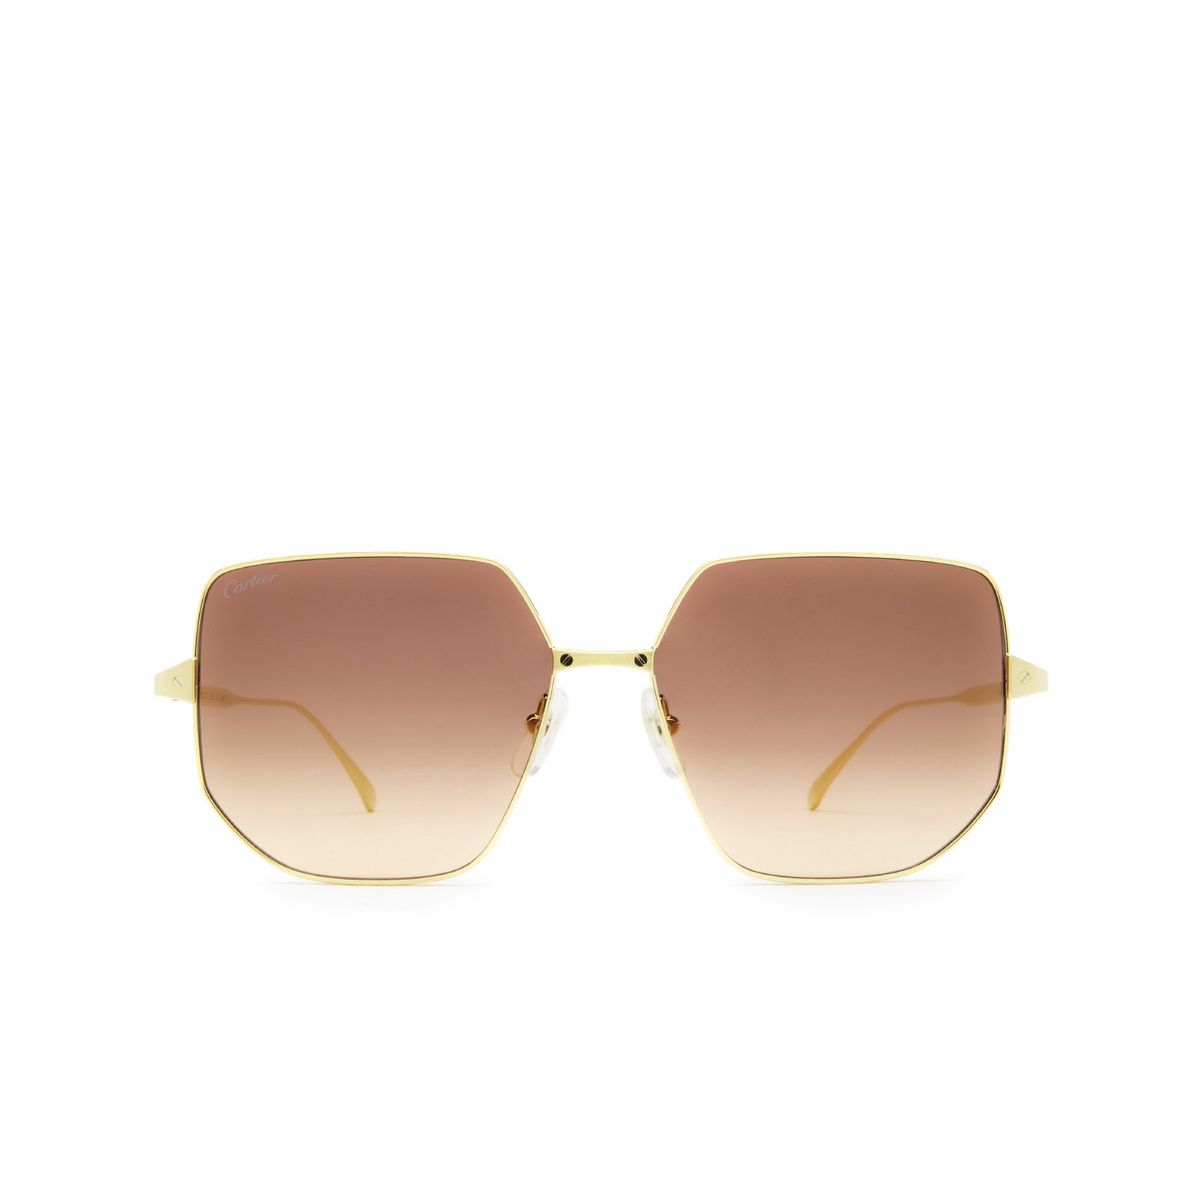 Cartier® Irregular Sunglasses: CT0327S color Gold 003 - front view.